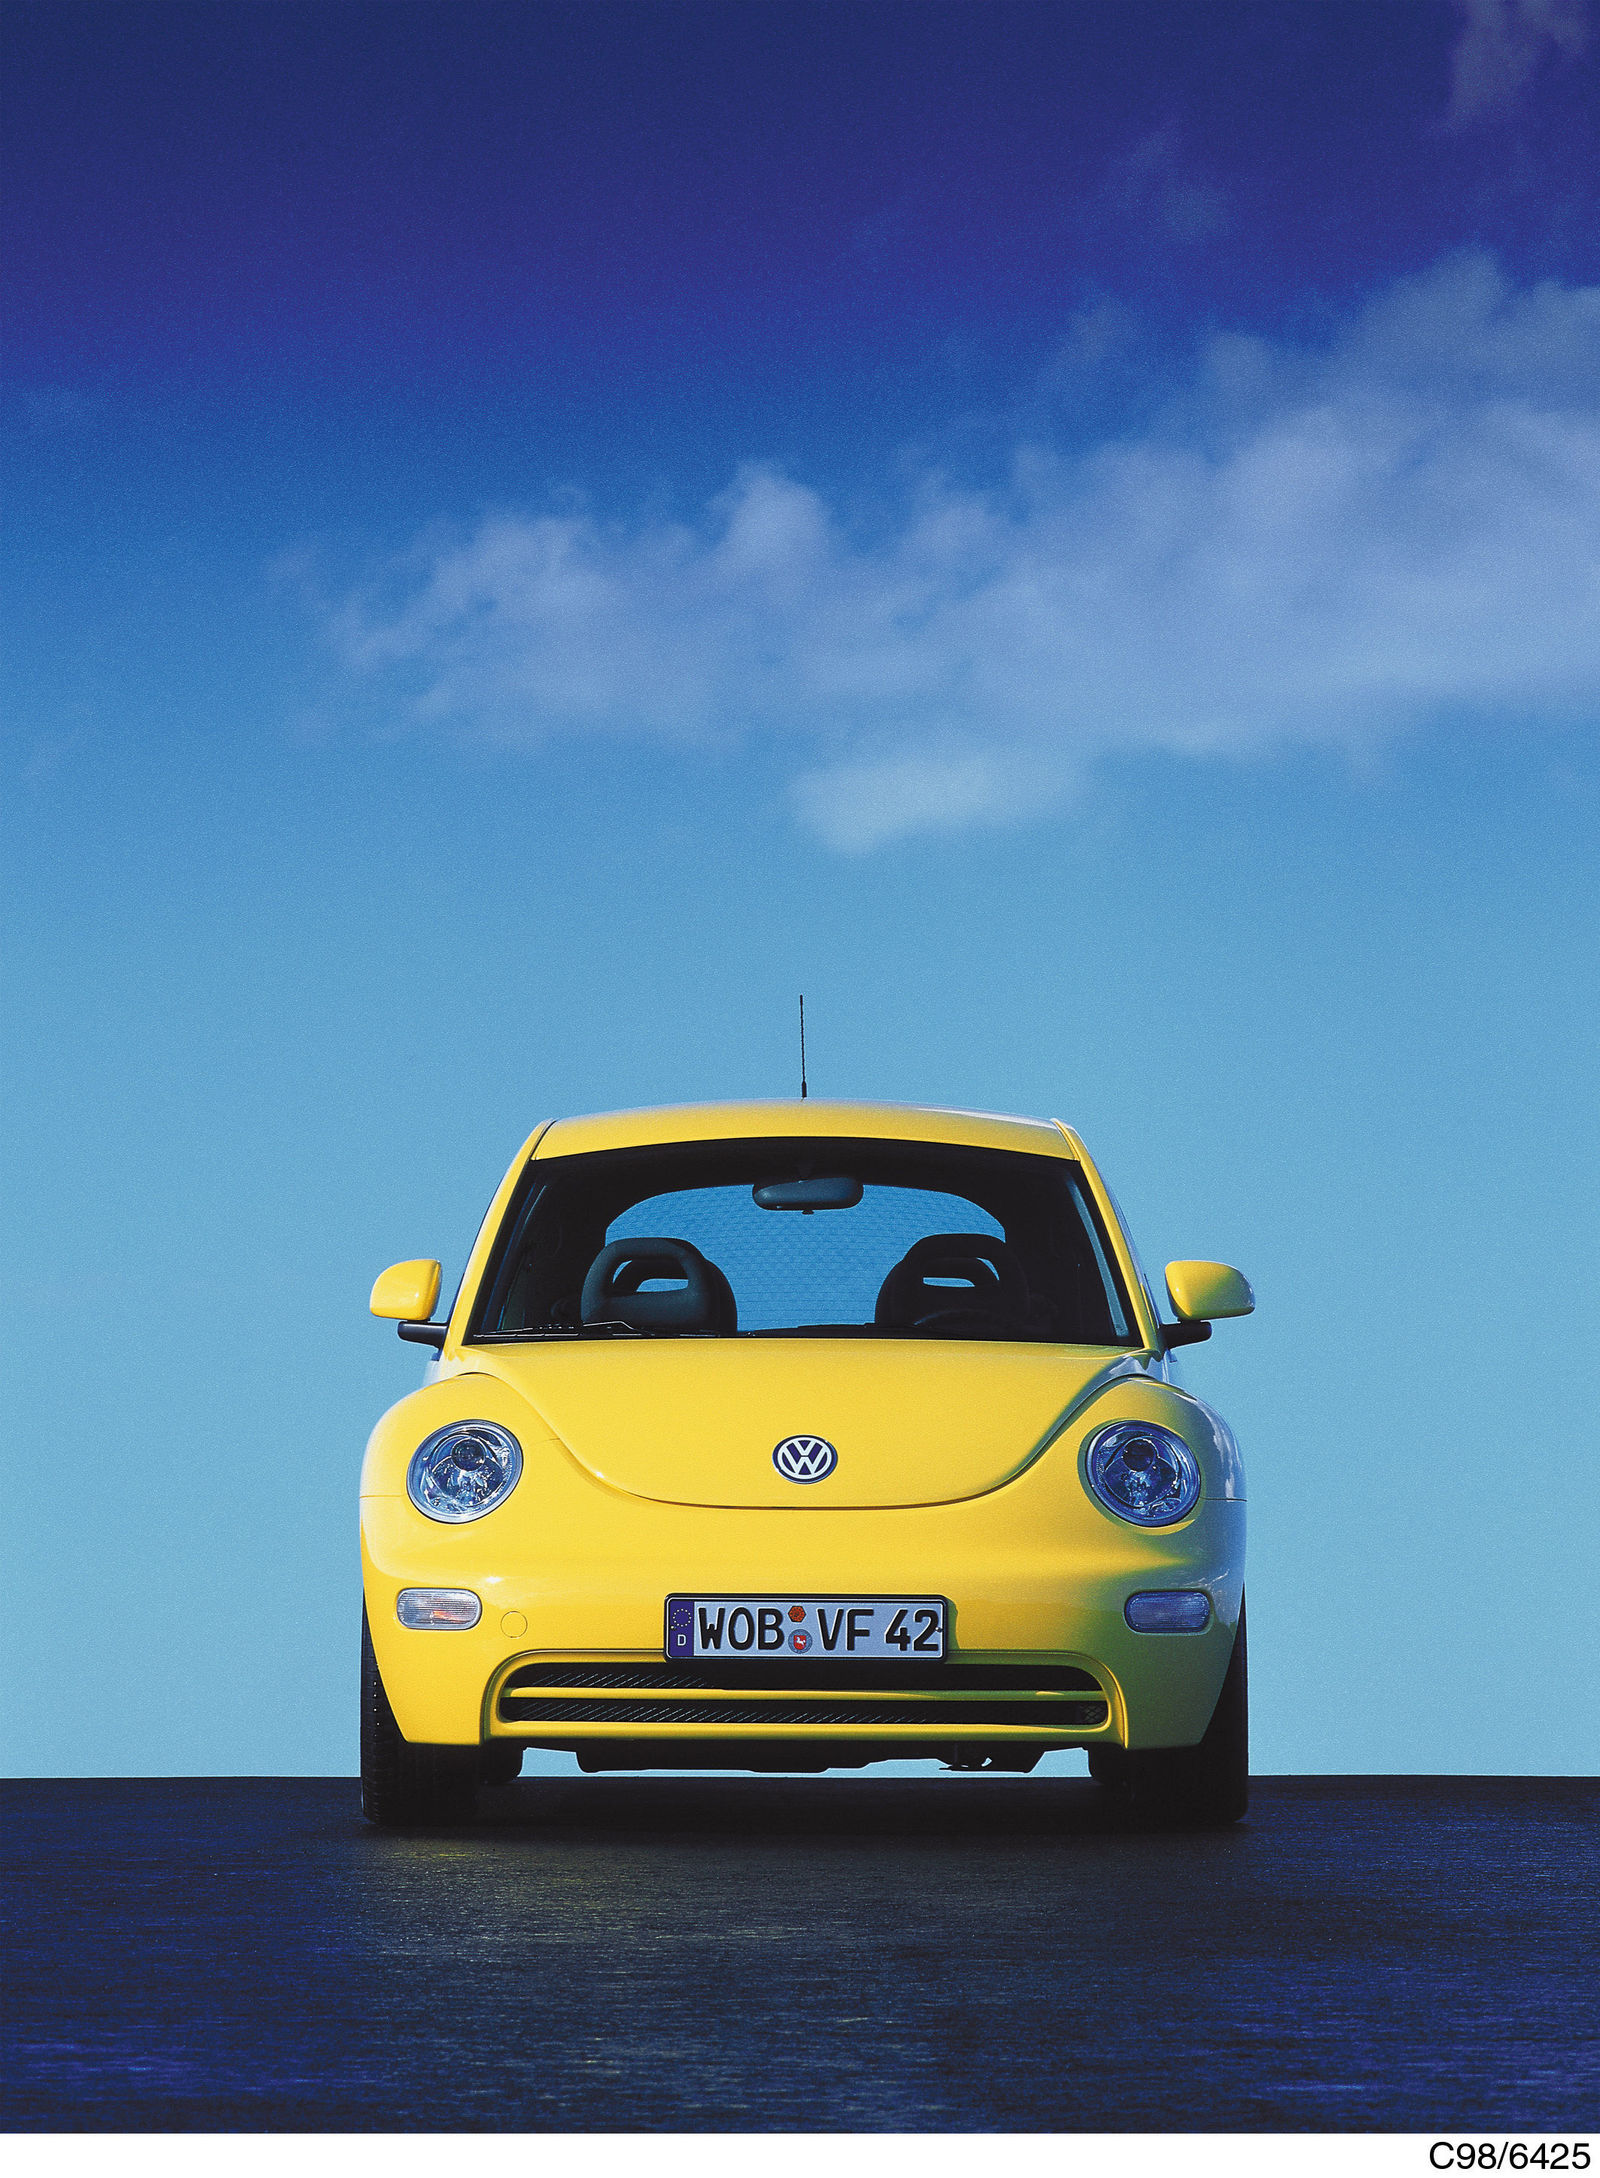 Product: New Beetle Europa Version (1998)